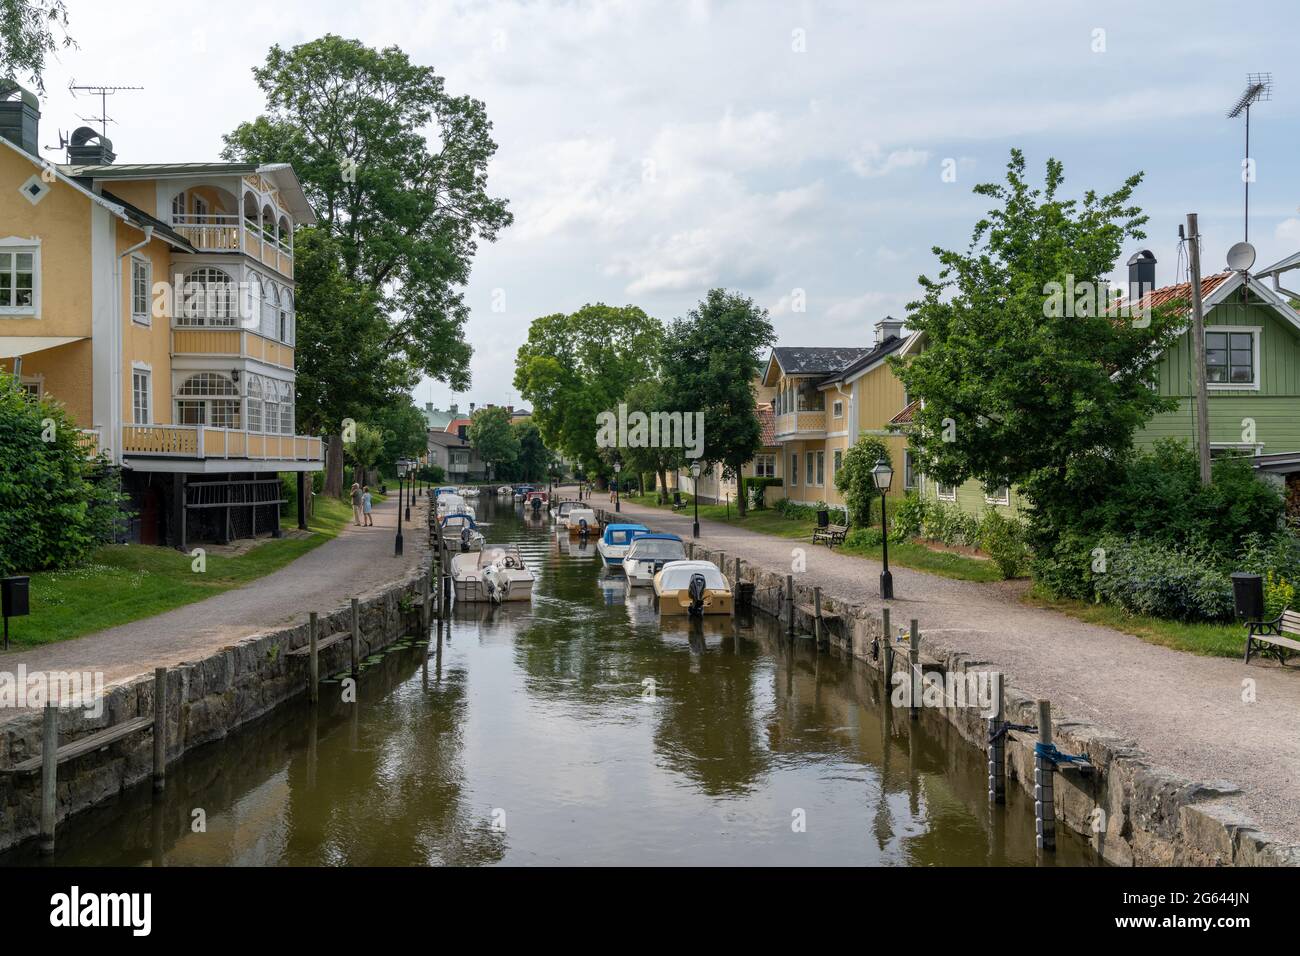 Trosa, Sweden - 22 June, 2021: many boats line the canals of the harbor front in the idyllic Swedish village of Trosa Stock Photo